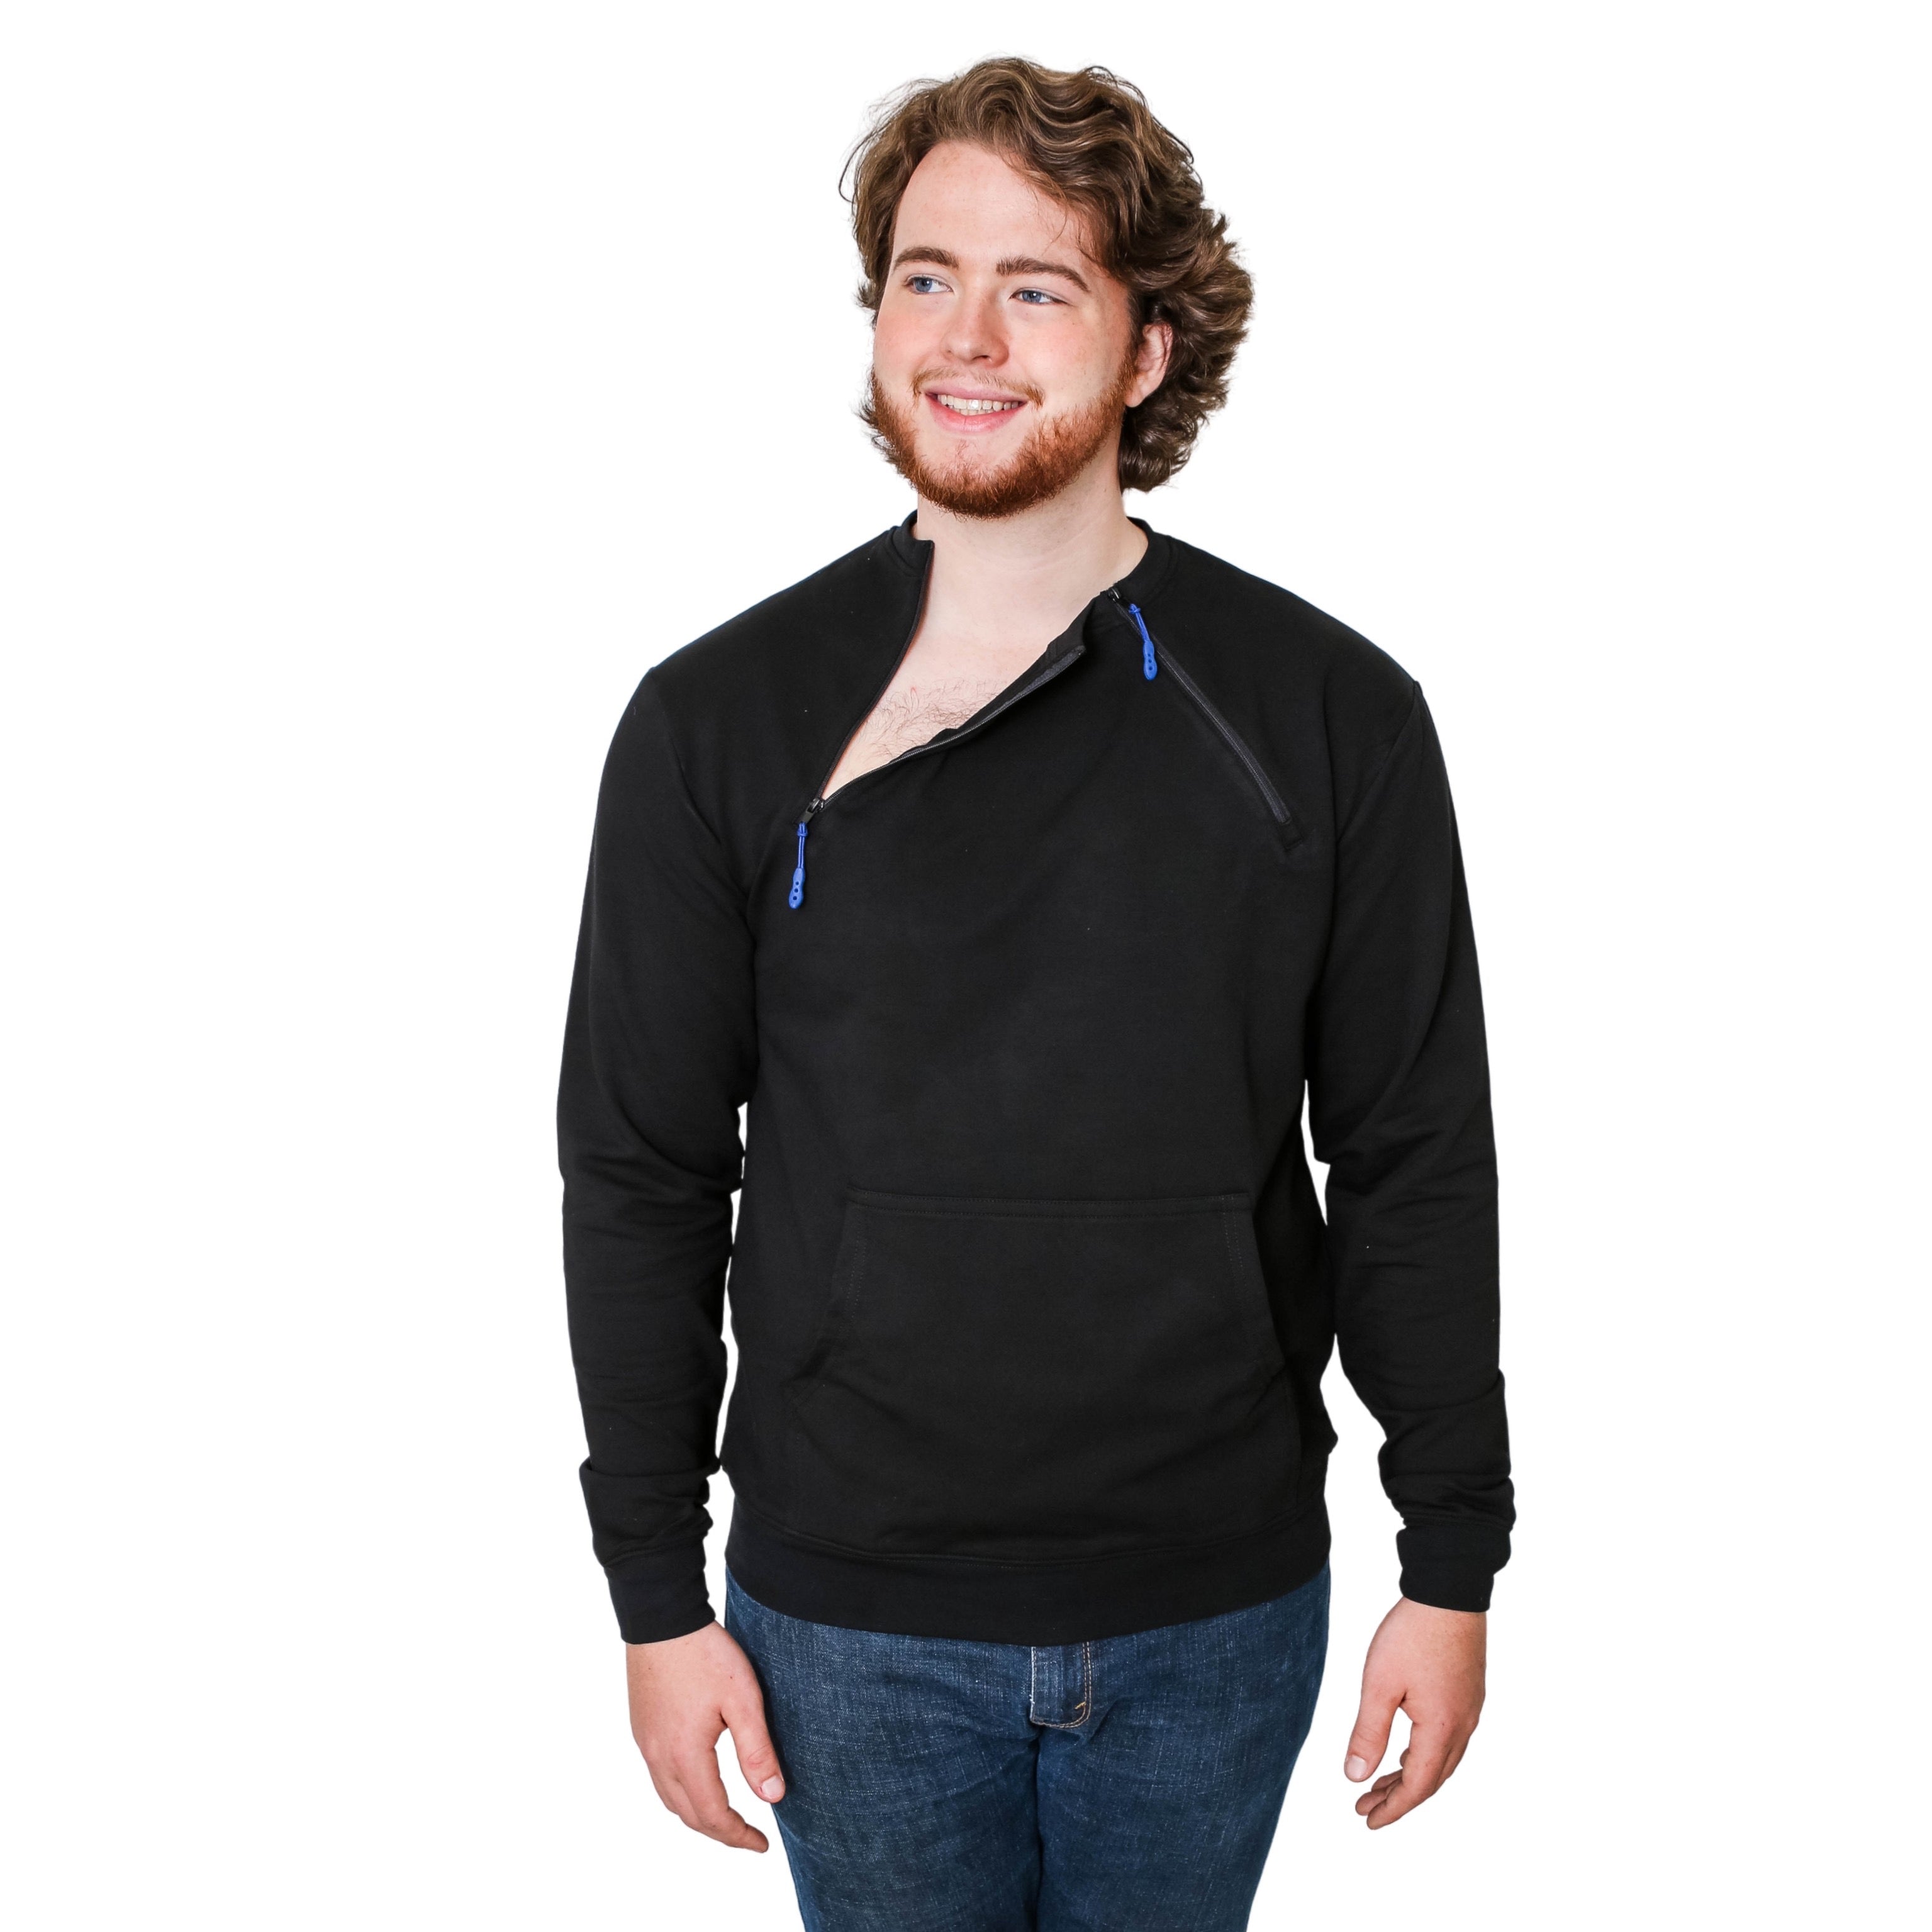 Chest Port Access Thick Warm Unisex Sweater